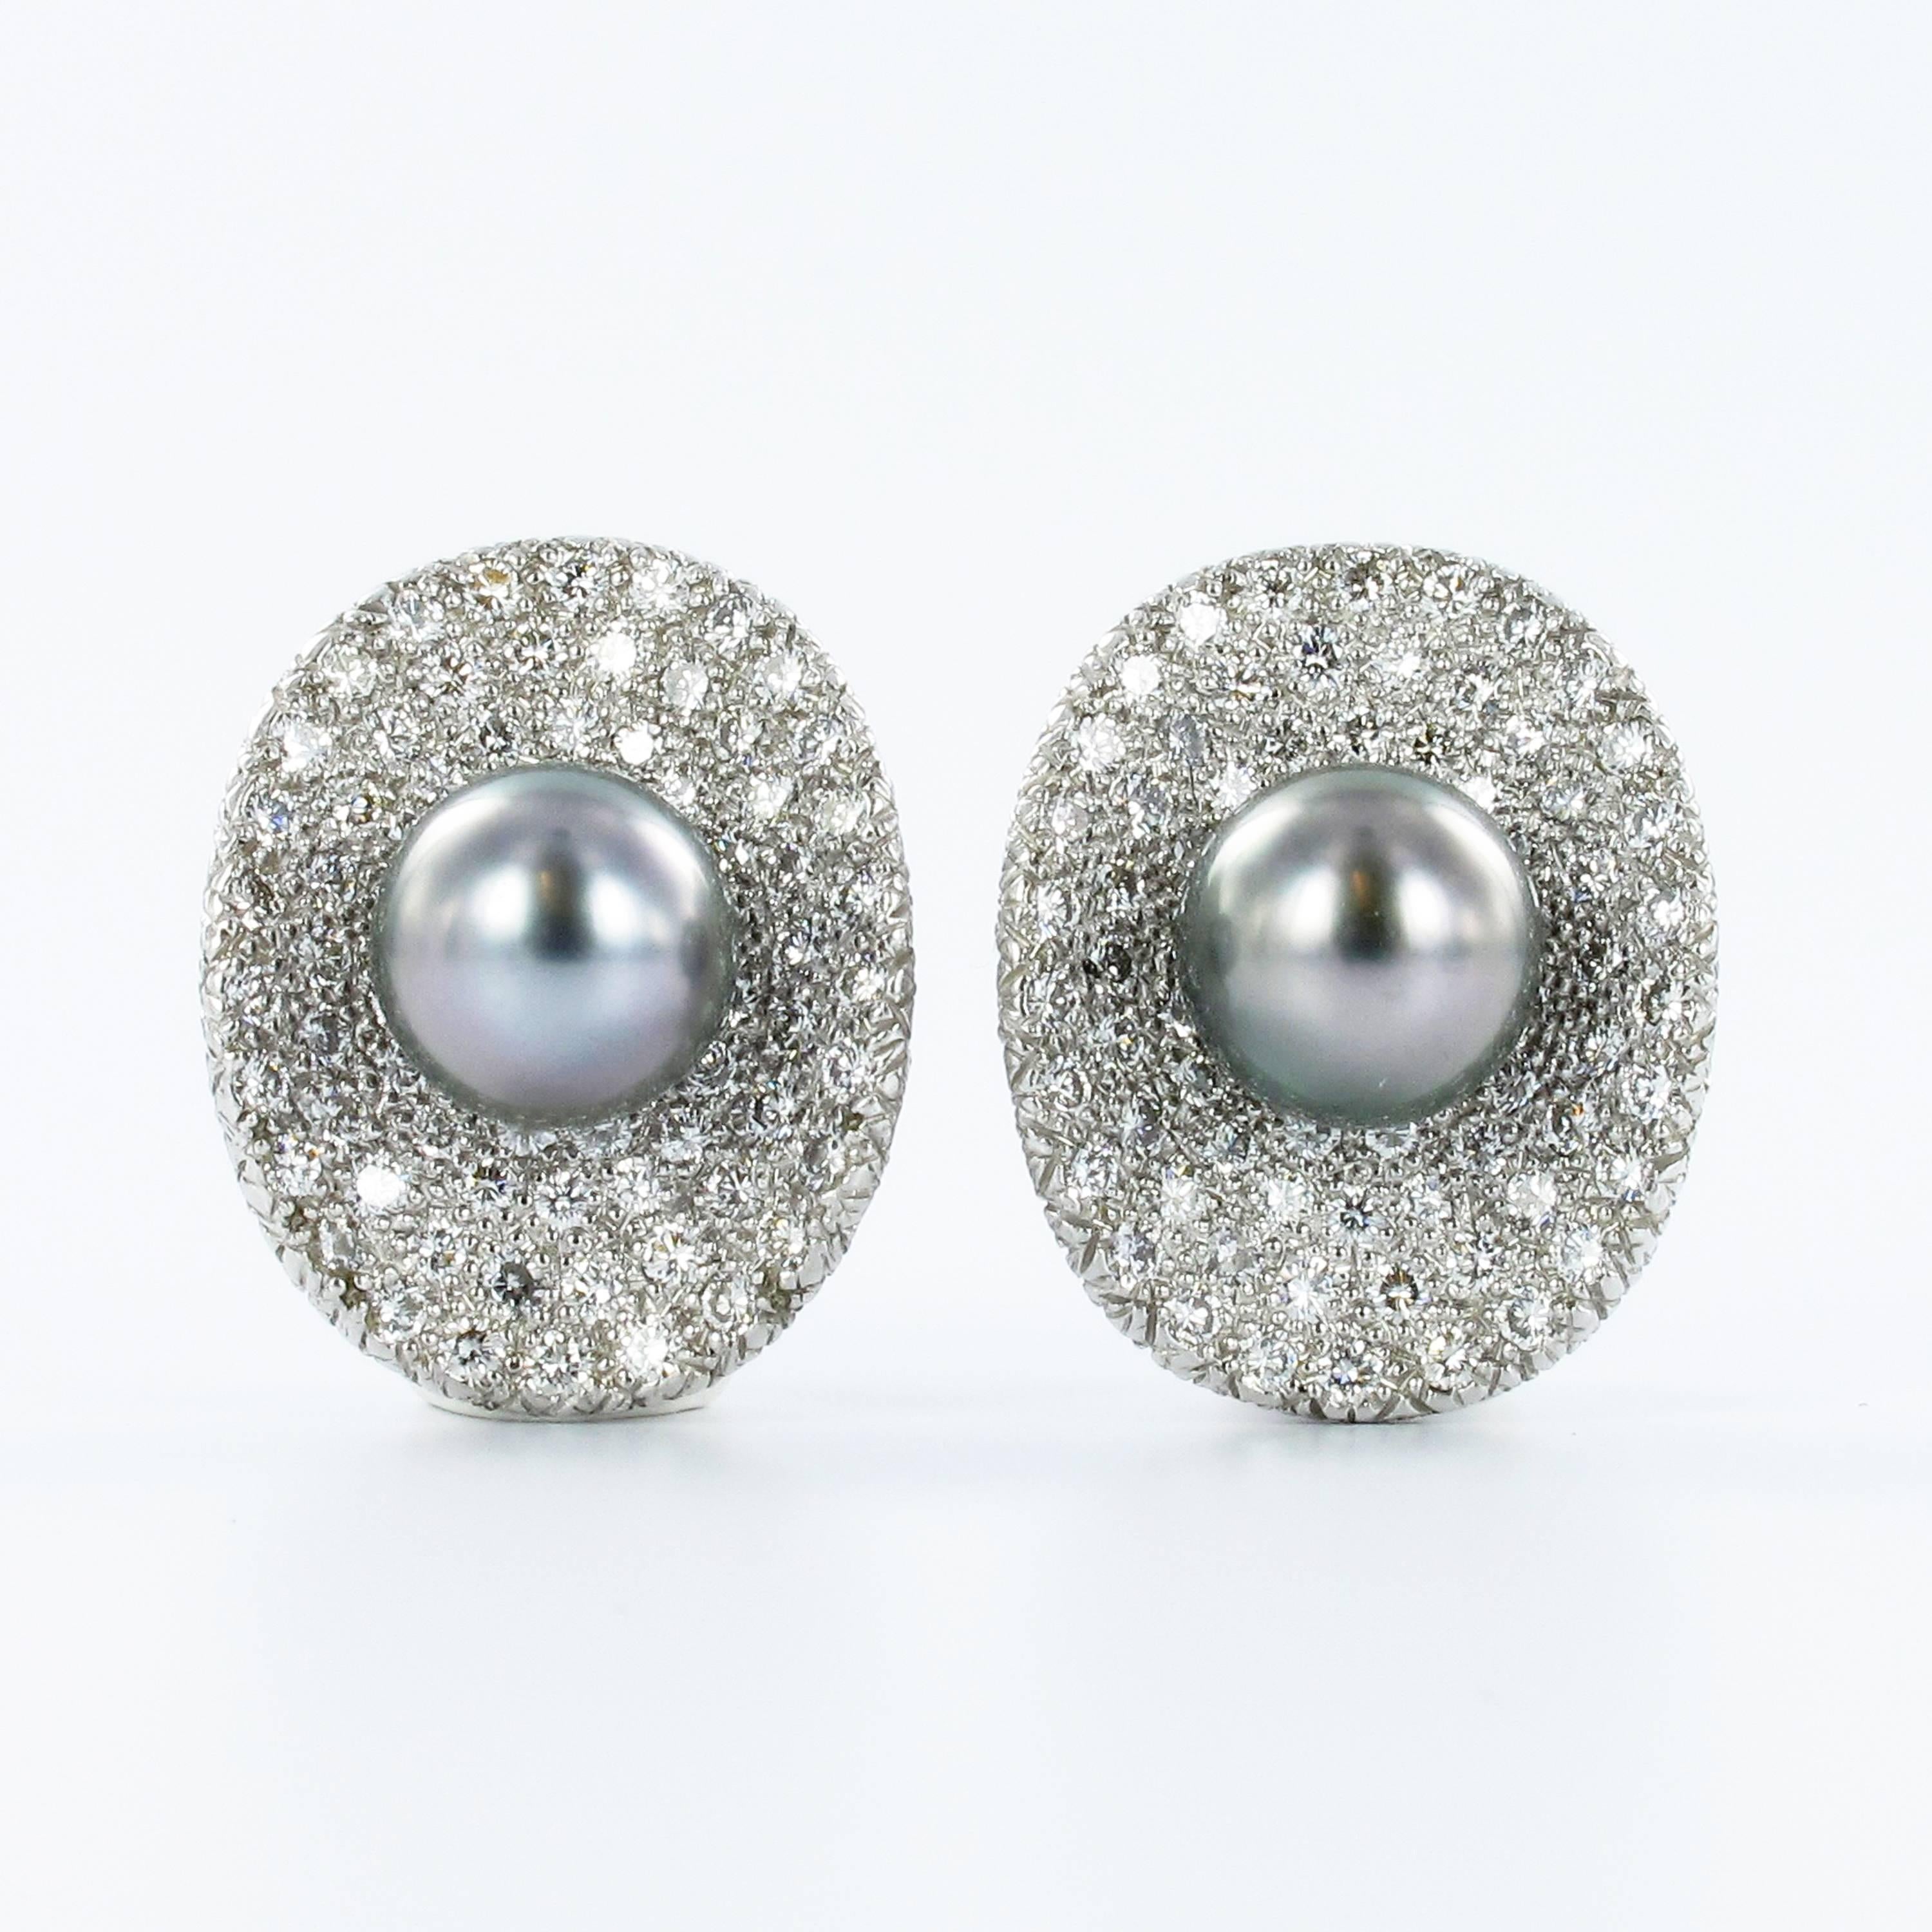 These handcrafted earclips in 18k white gold feature two attractive Tahitian cultured pearls of 9.1 mm diameter. The pearls are embedded in a field of 350 exqusitely pave set brilliant cut diamonds totalling 5.83 carats of G/H colour and vs clarity.